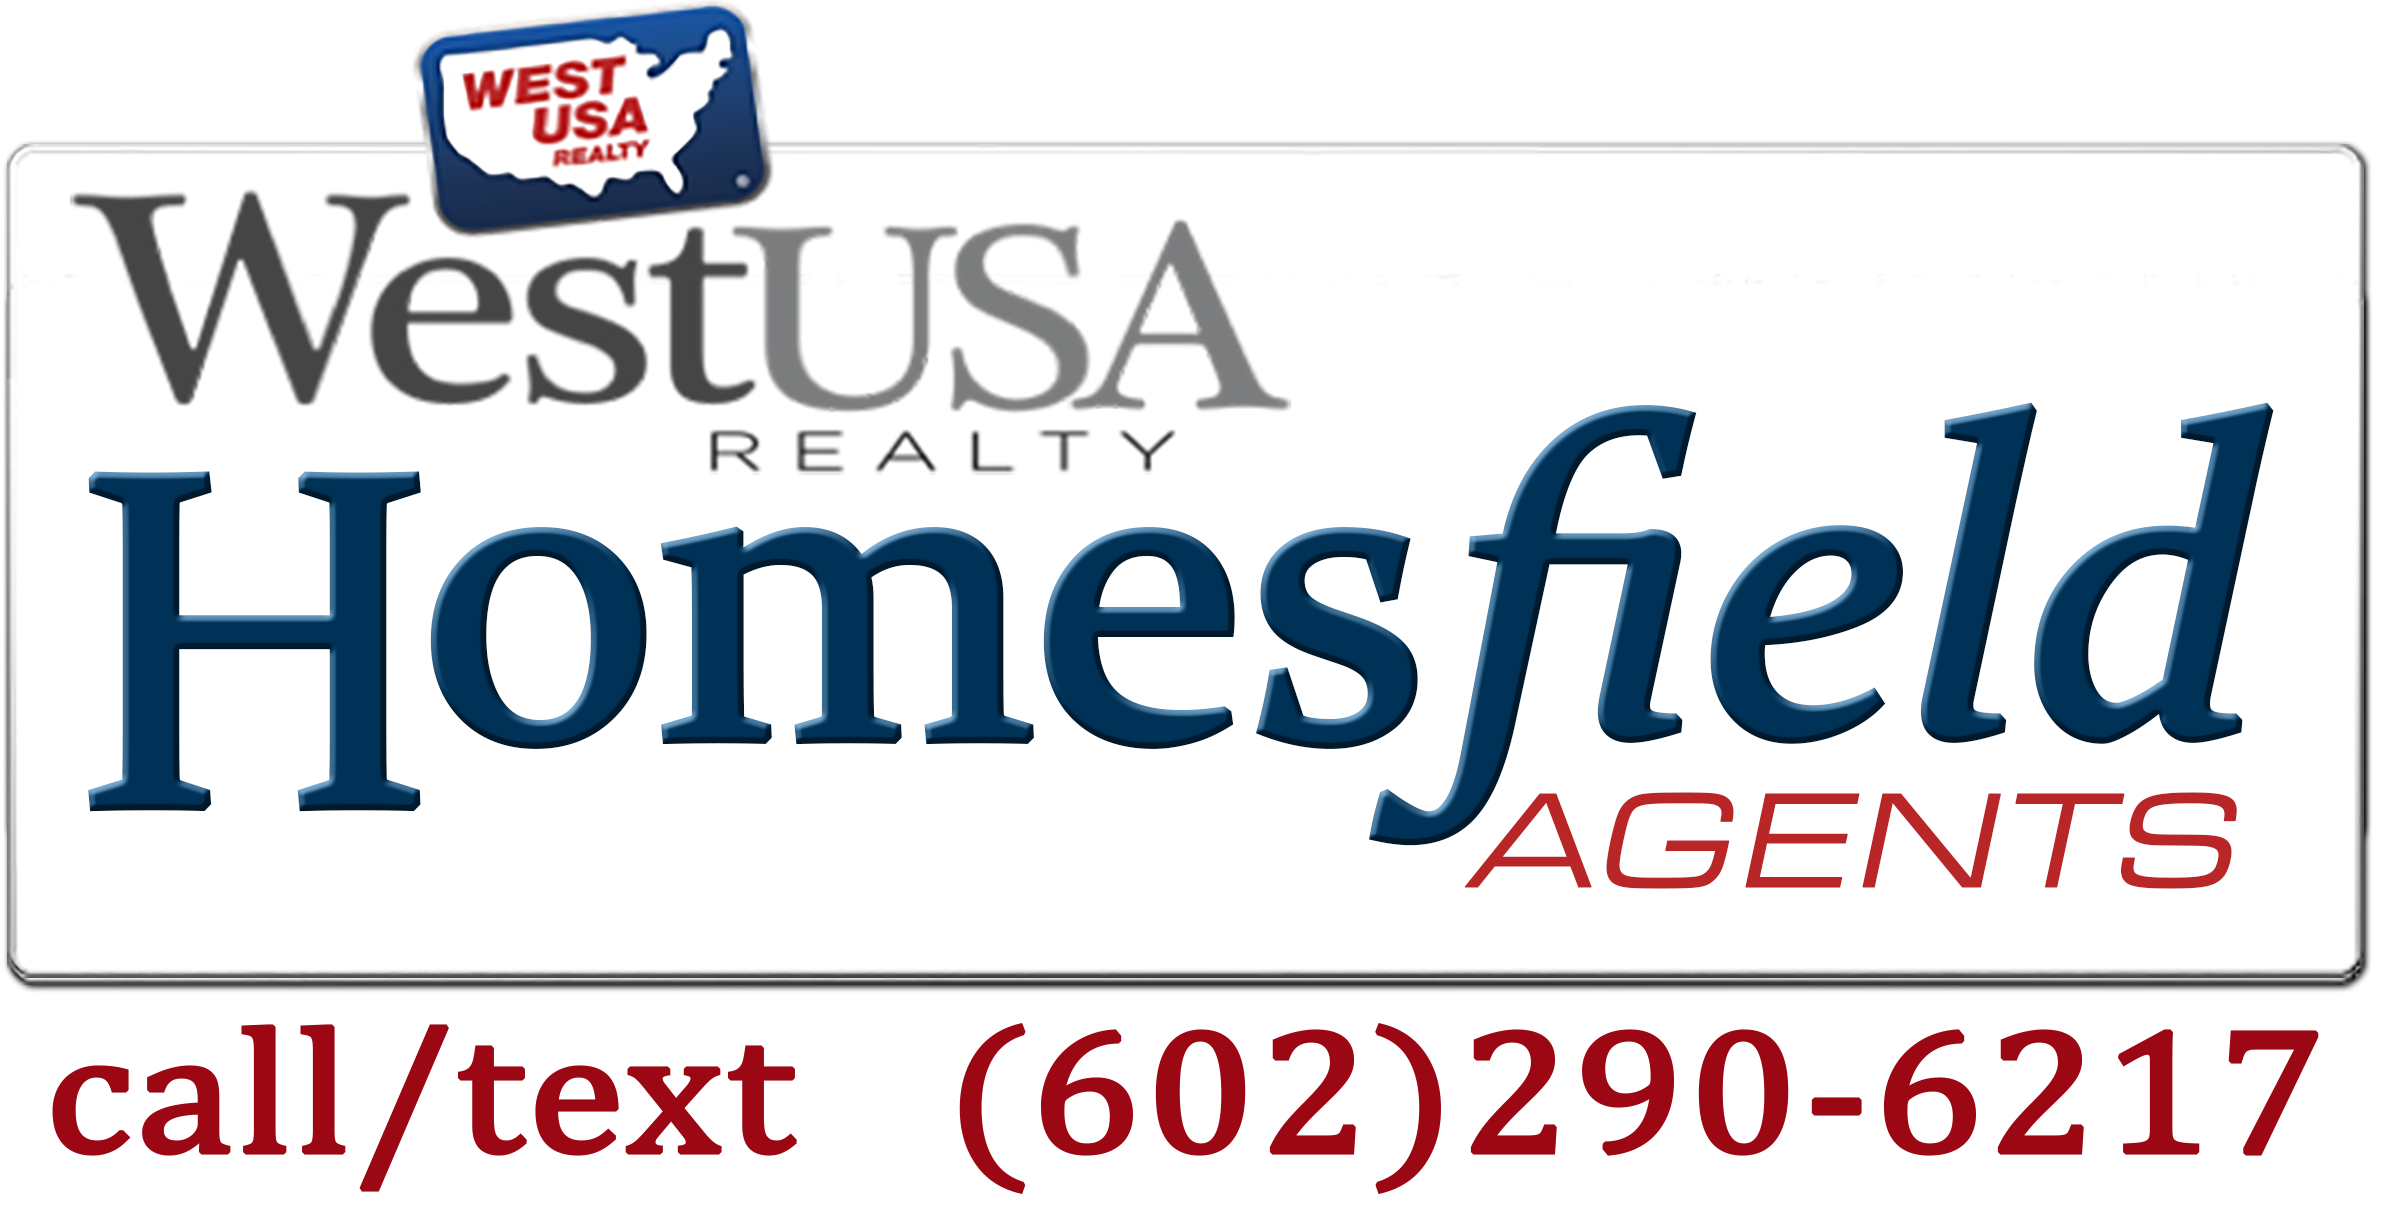 Homesfield Agents of West USA Realty in Wickenburg